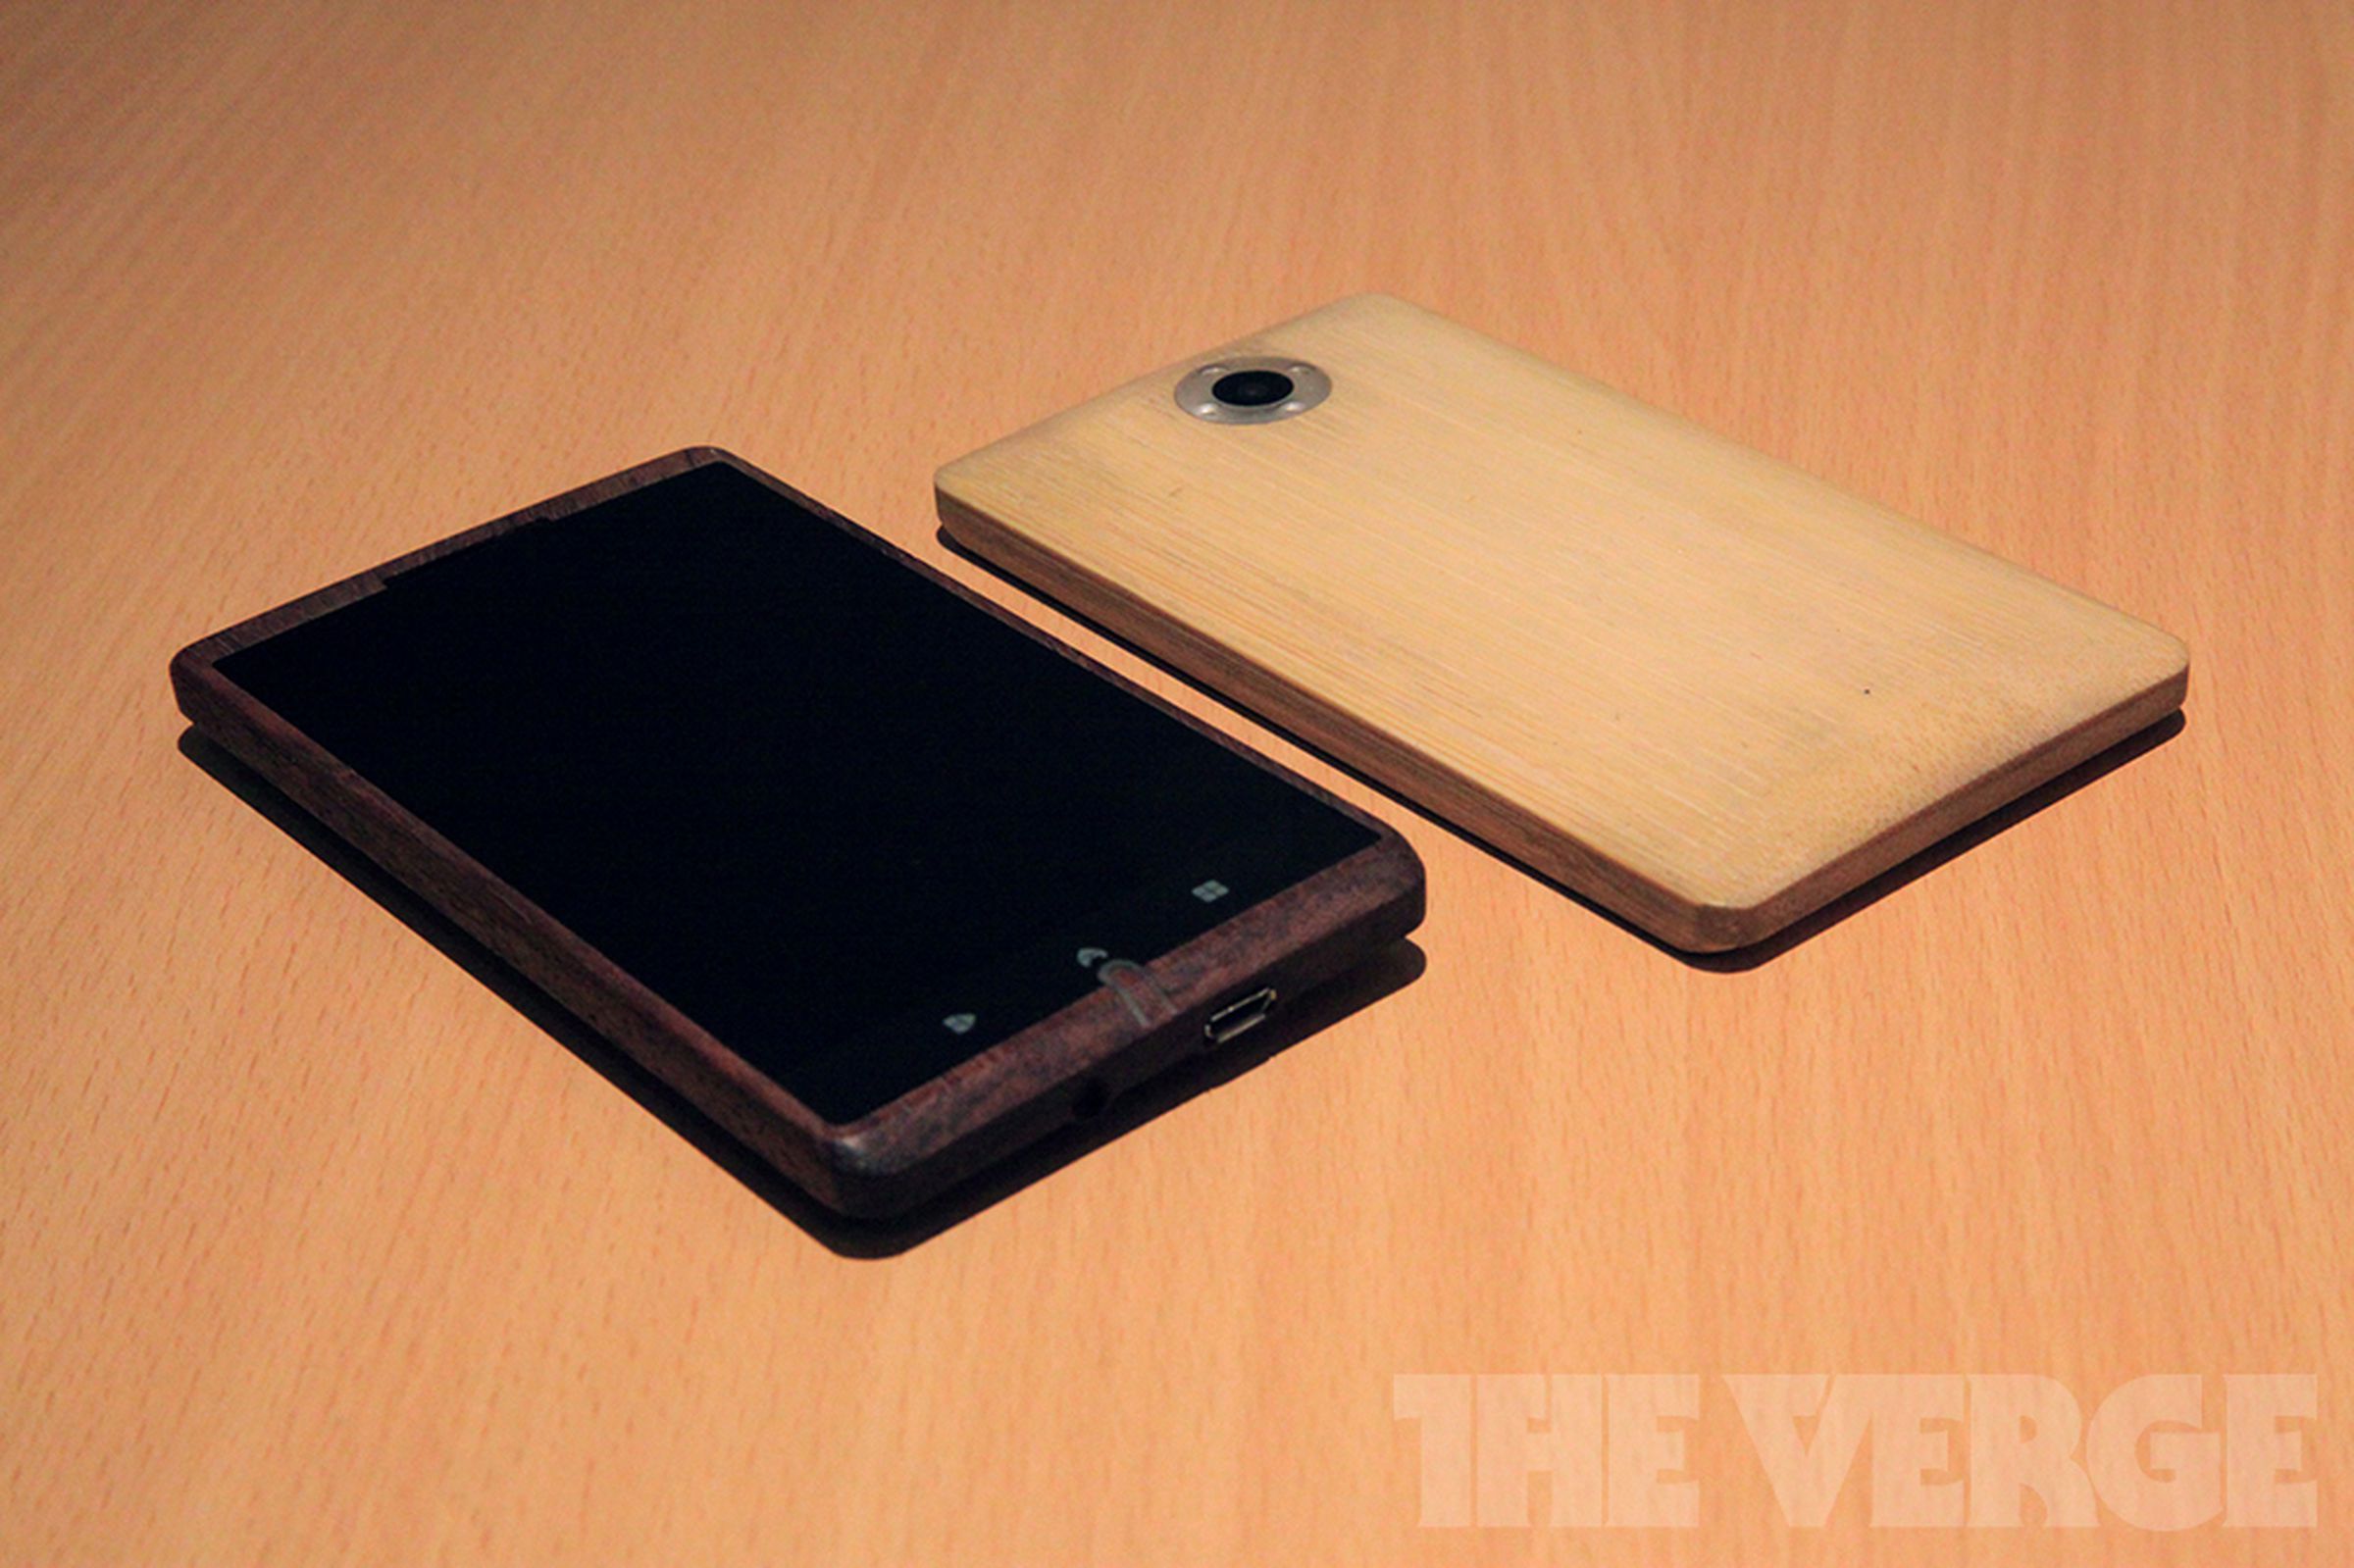 ADzero bamboo and rosewood prototypes hands-on images